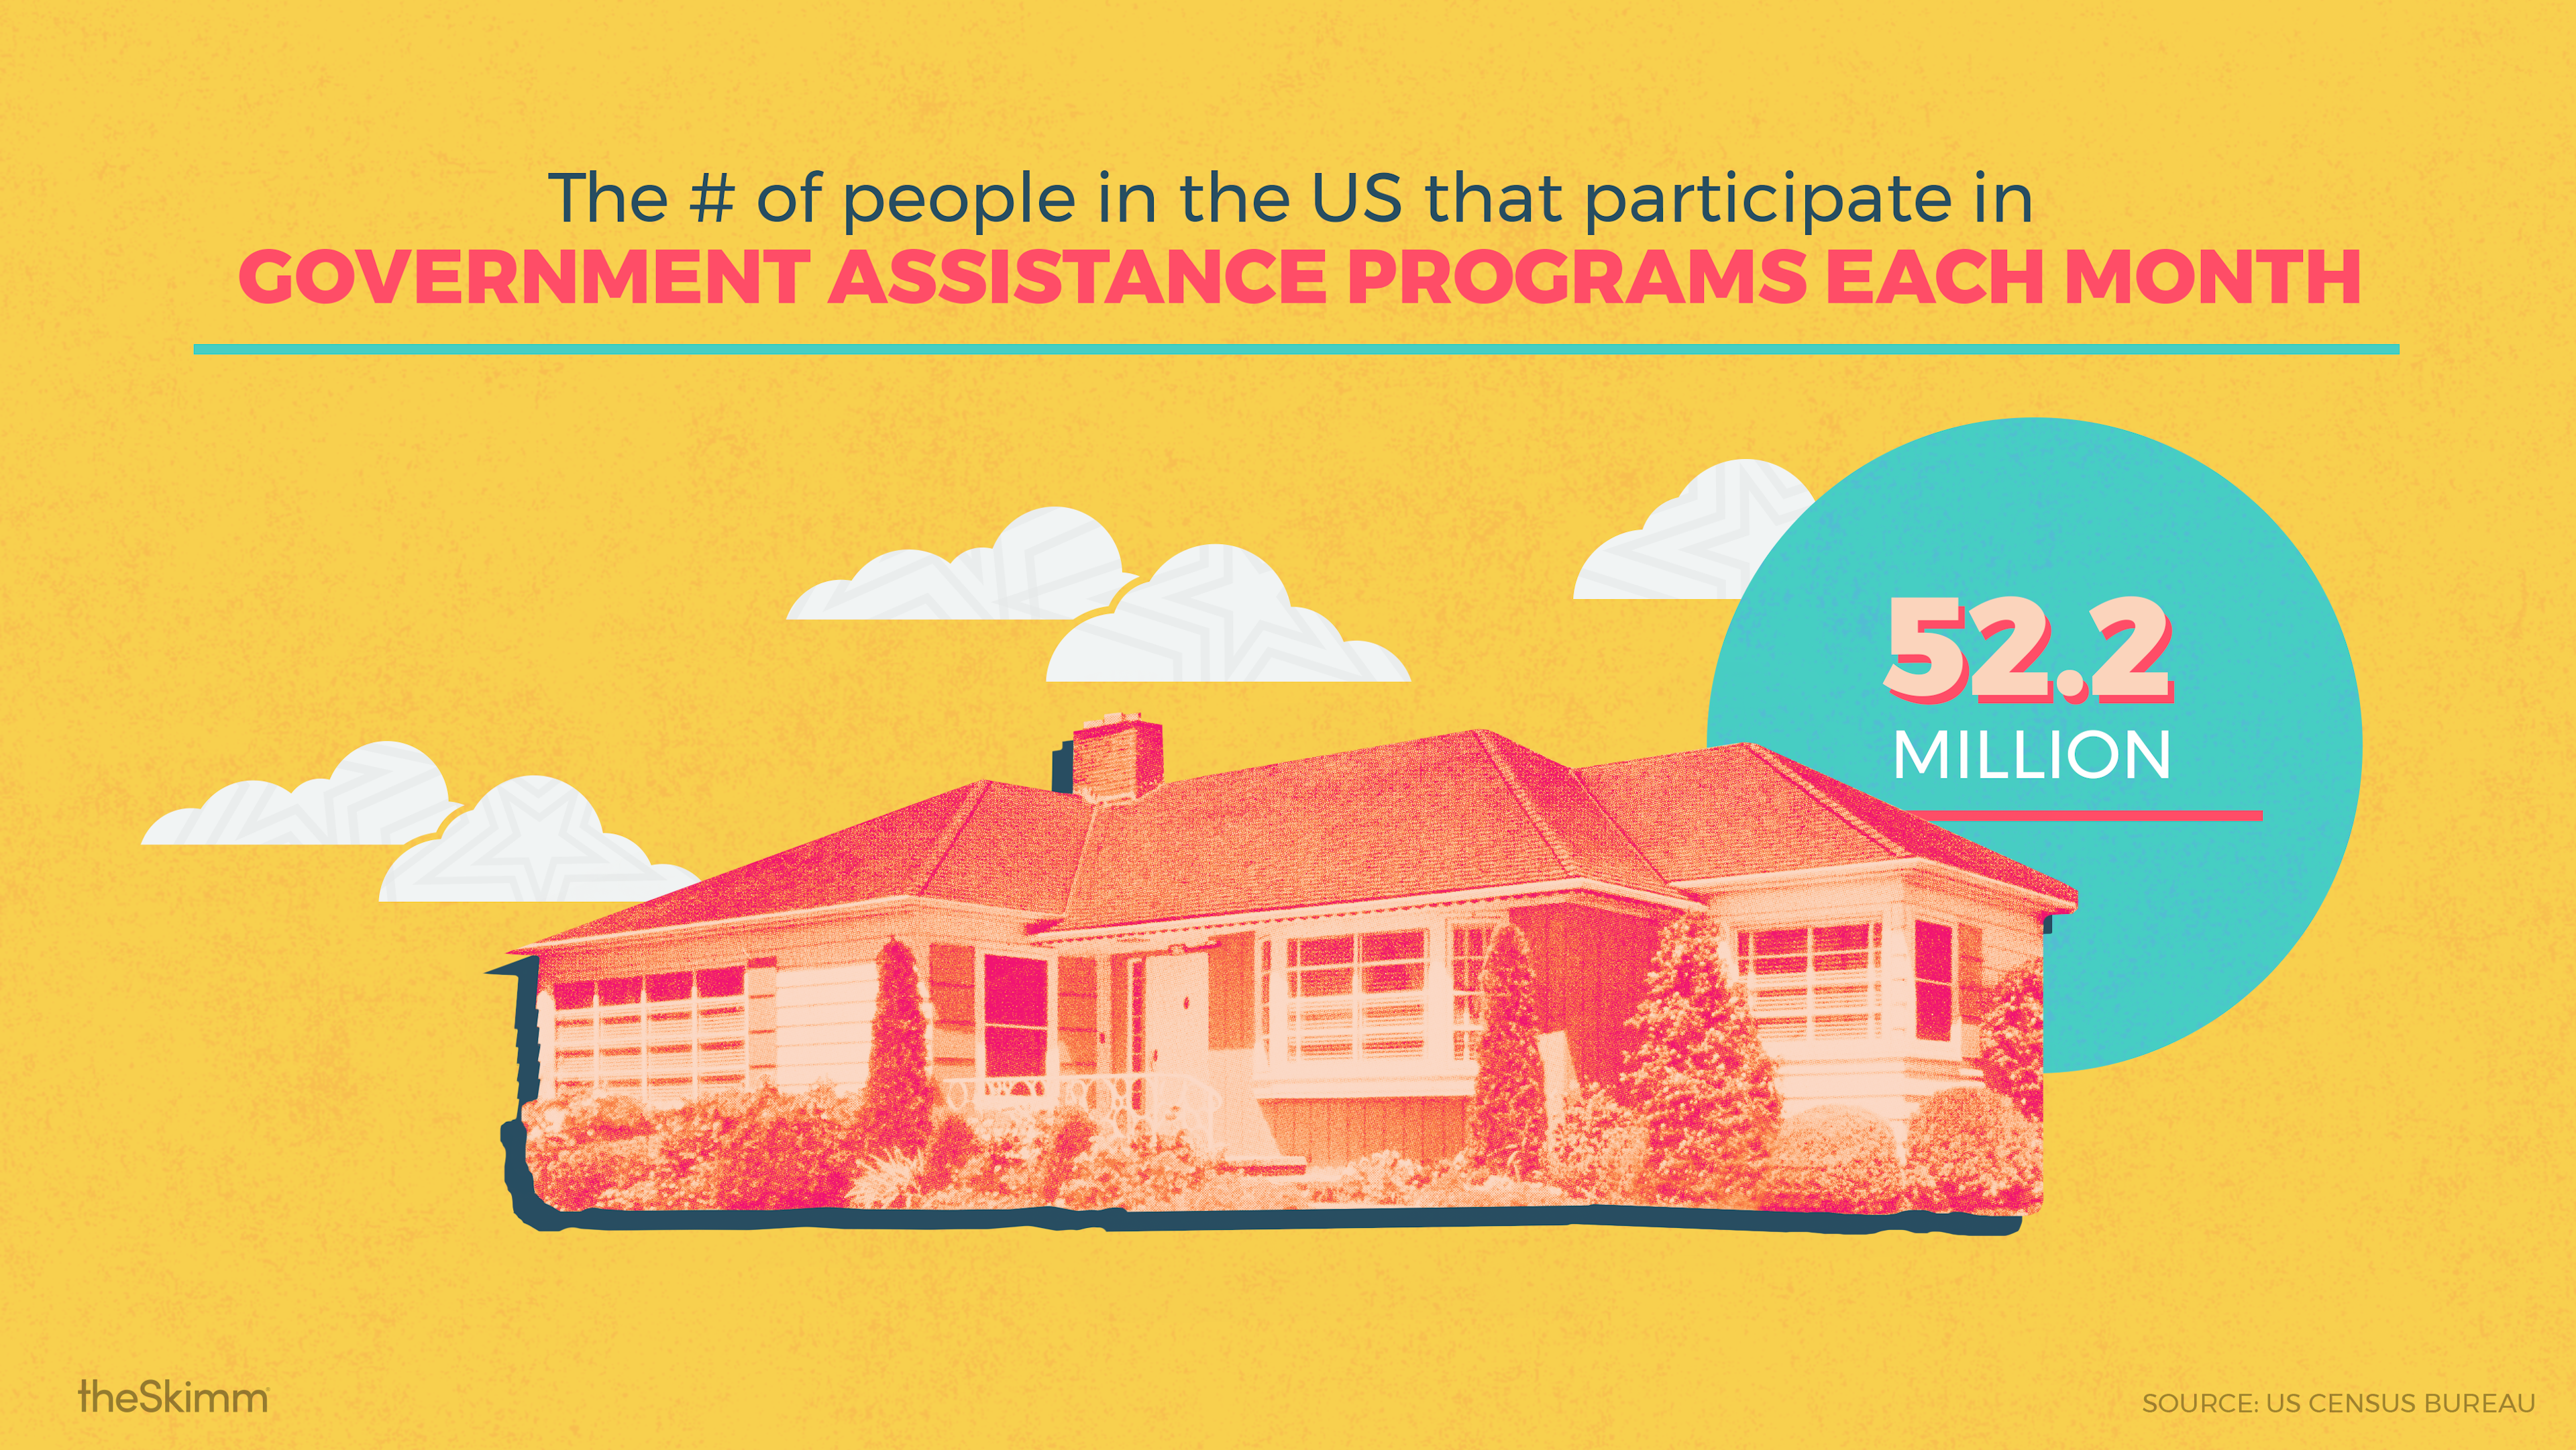 The number of people in the US that participate in government assistance programs each month: 52.2 million